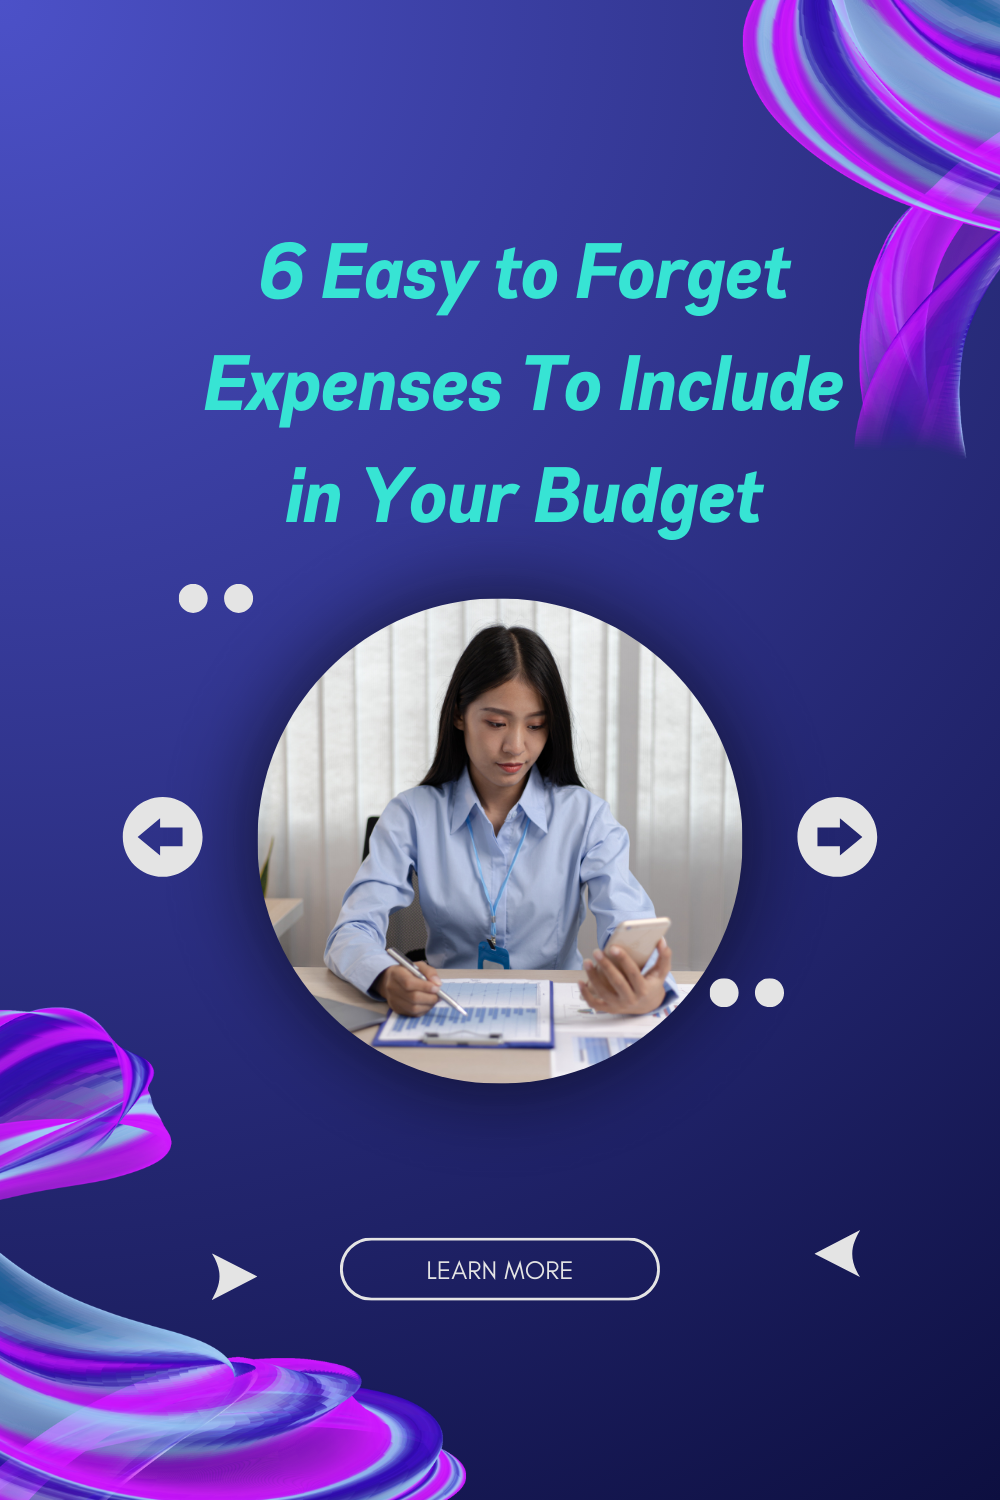 6 Easy to Forget Expenses To Include in Your Budget